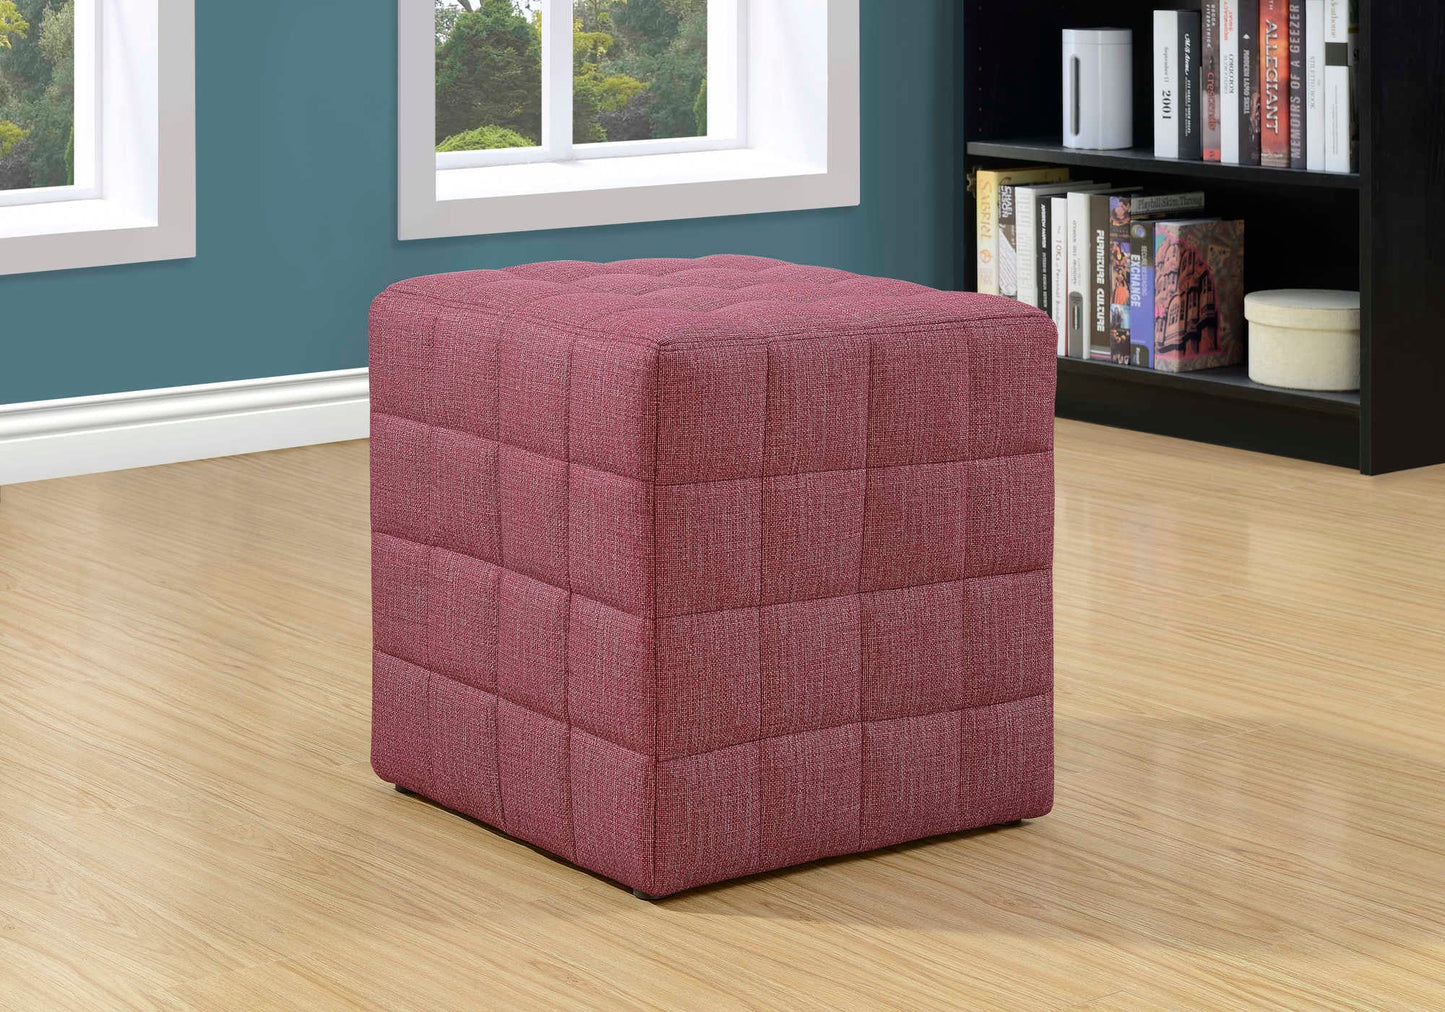 18" Cube-shaped Upholstered Bedroom Ottoman with Biscuit Tufting